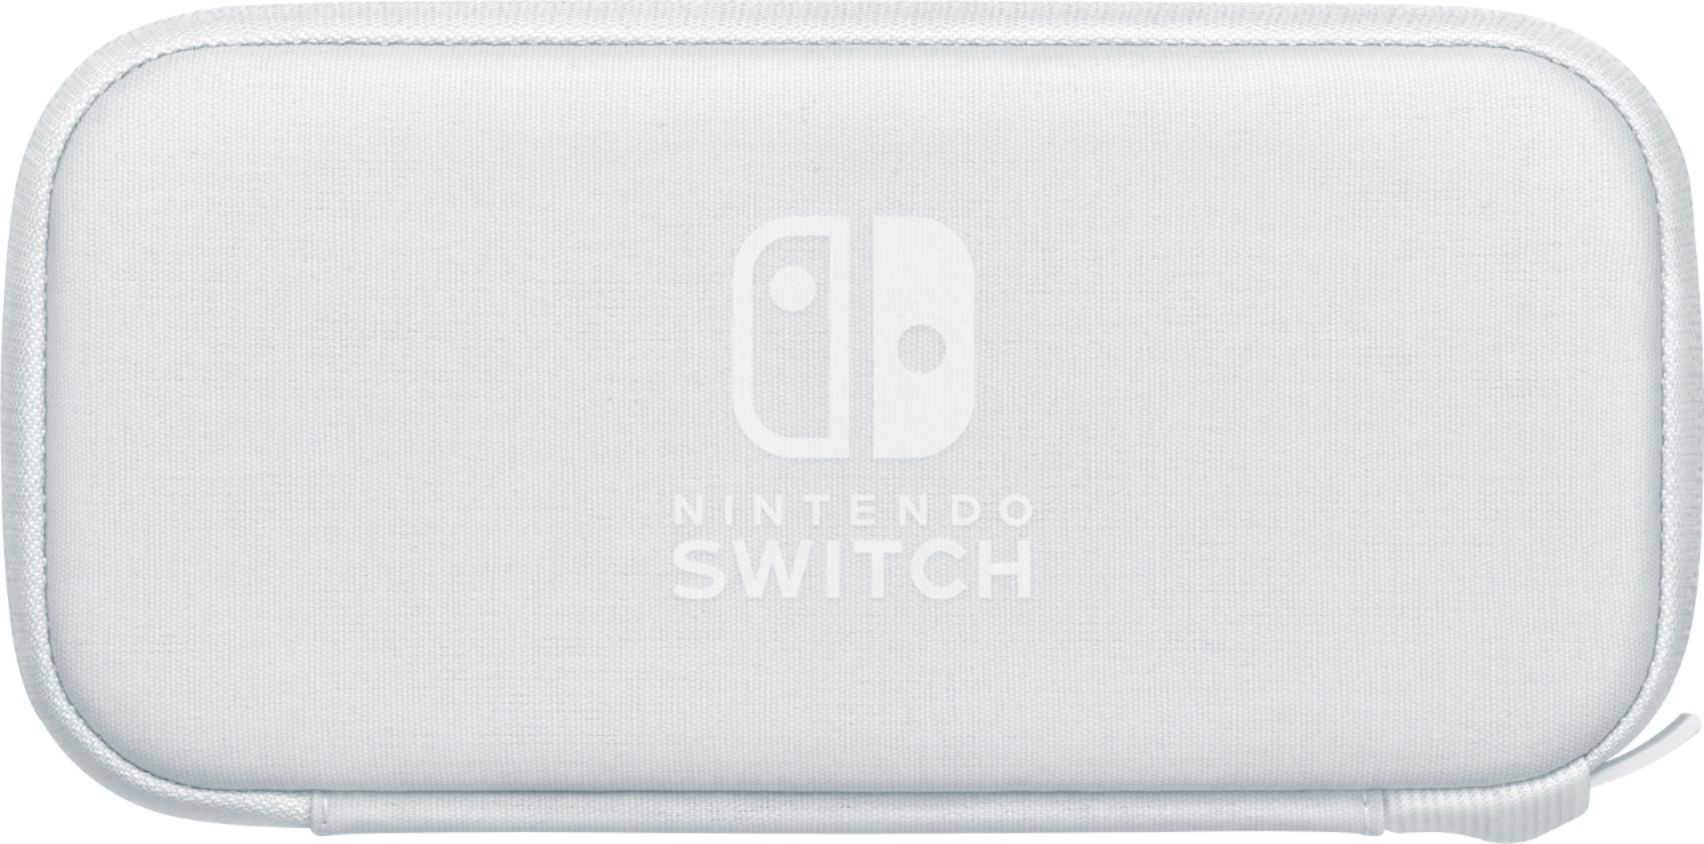 Carry Case And Screen Protector For Nintendo Switch Lite Gray